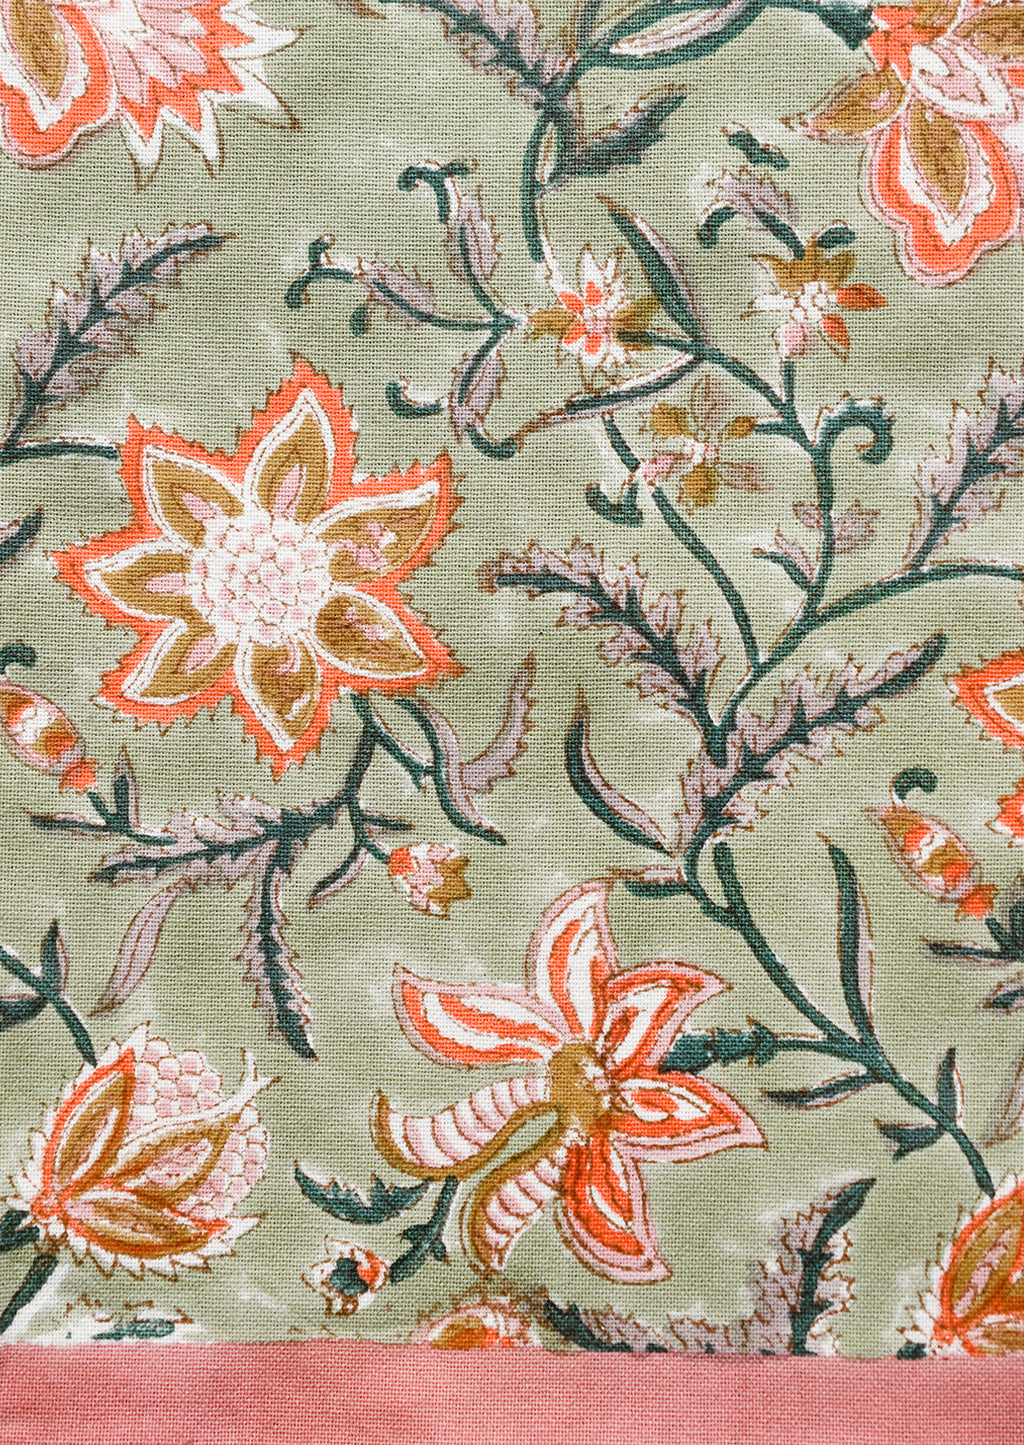 2: A tea towel with sage green background and orange and pink floral print.